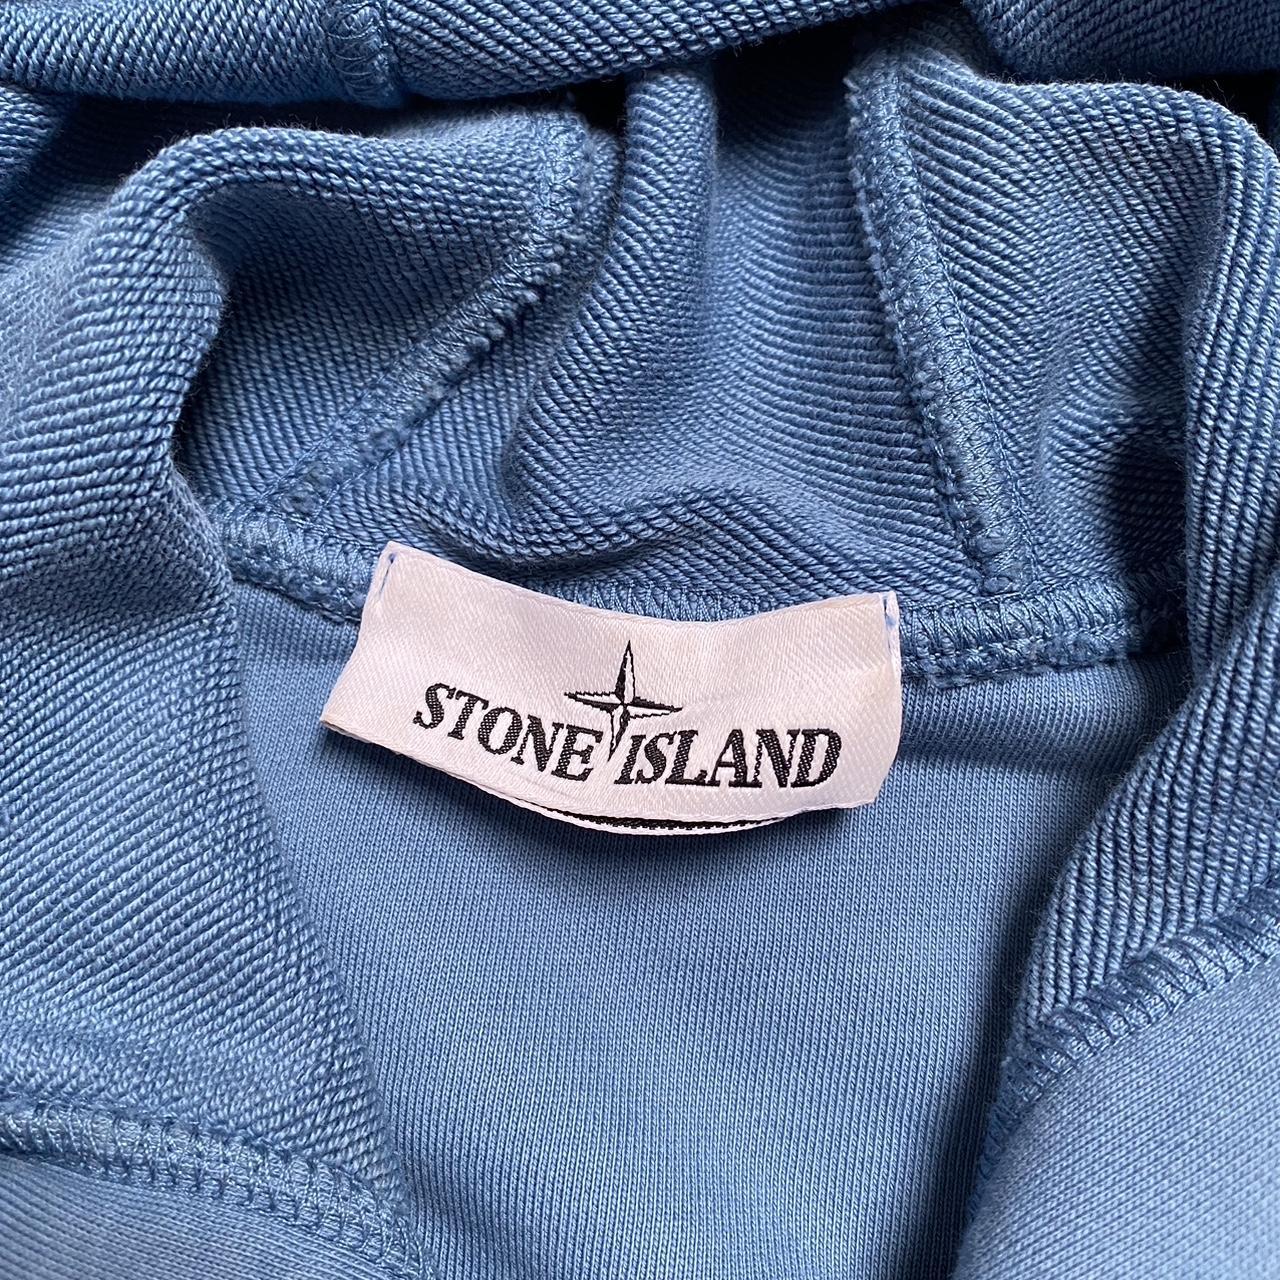 2022 stone island zip up in near perfect condition.... - Depop